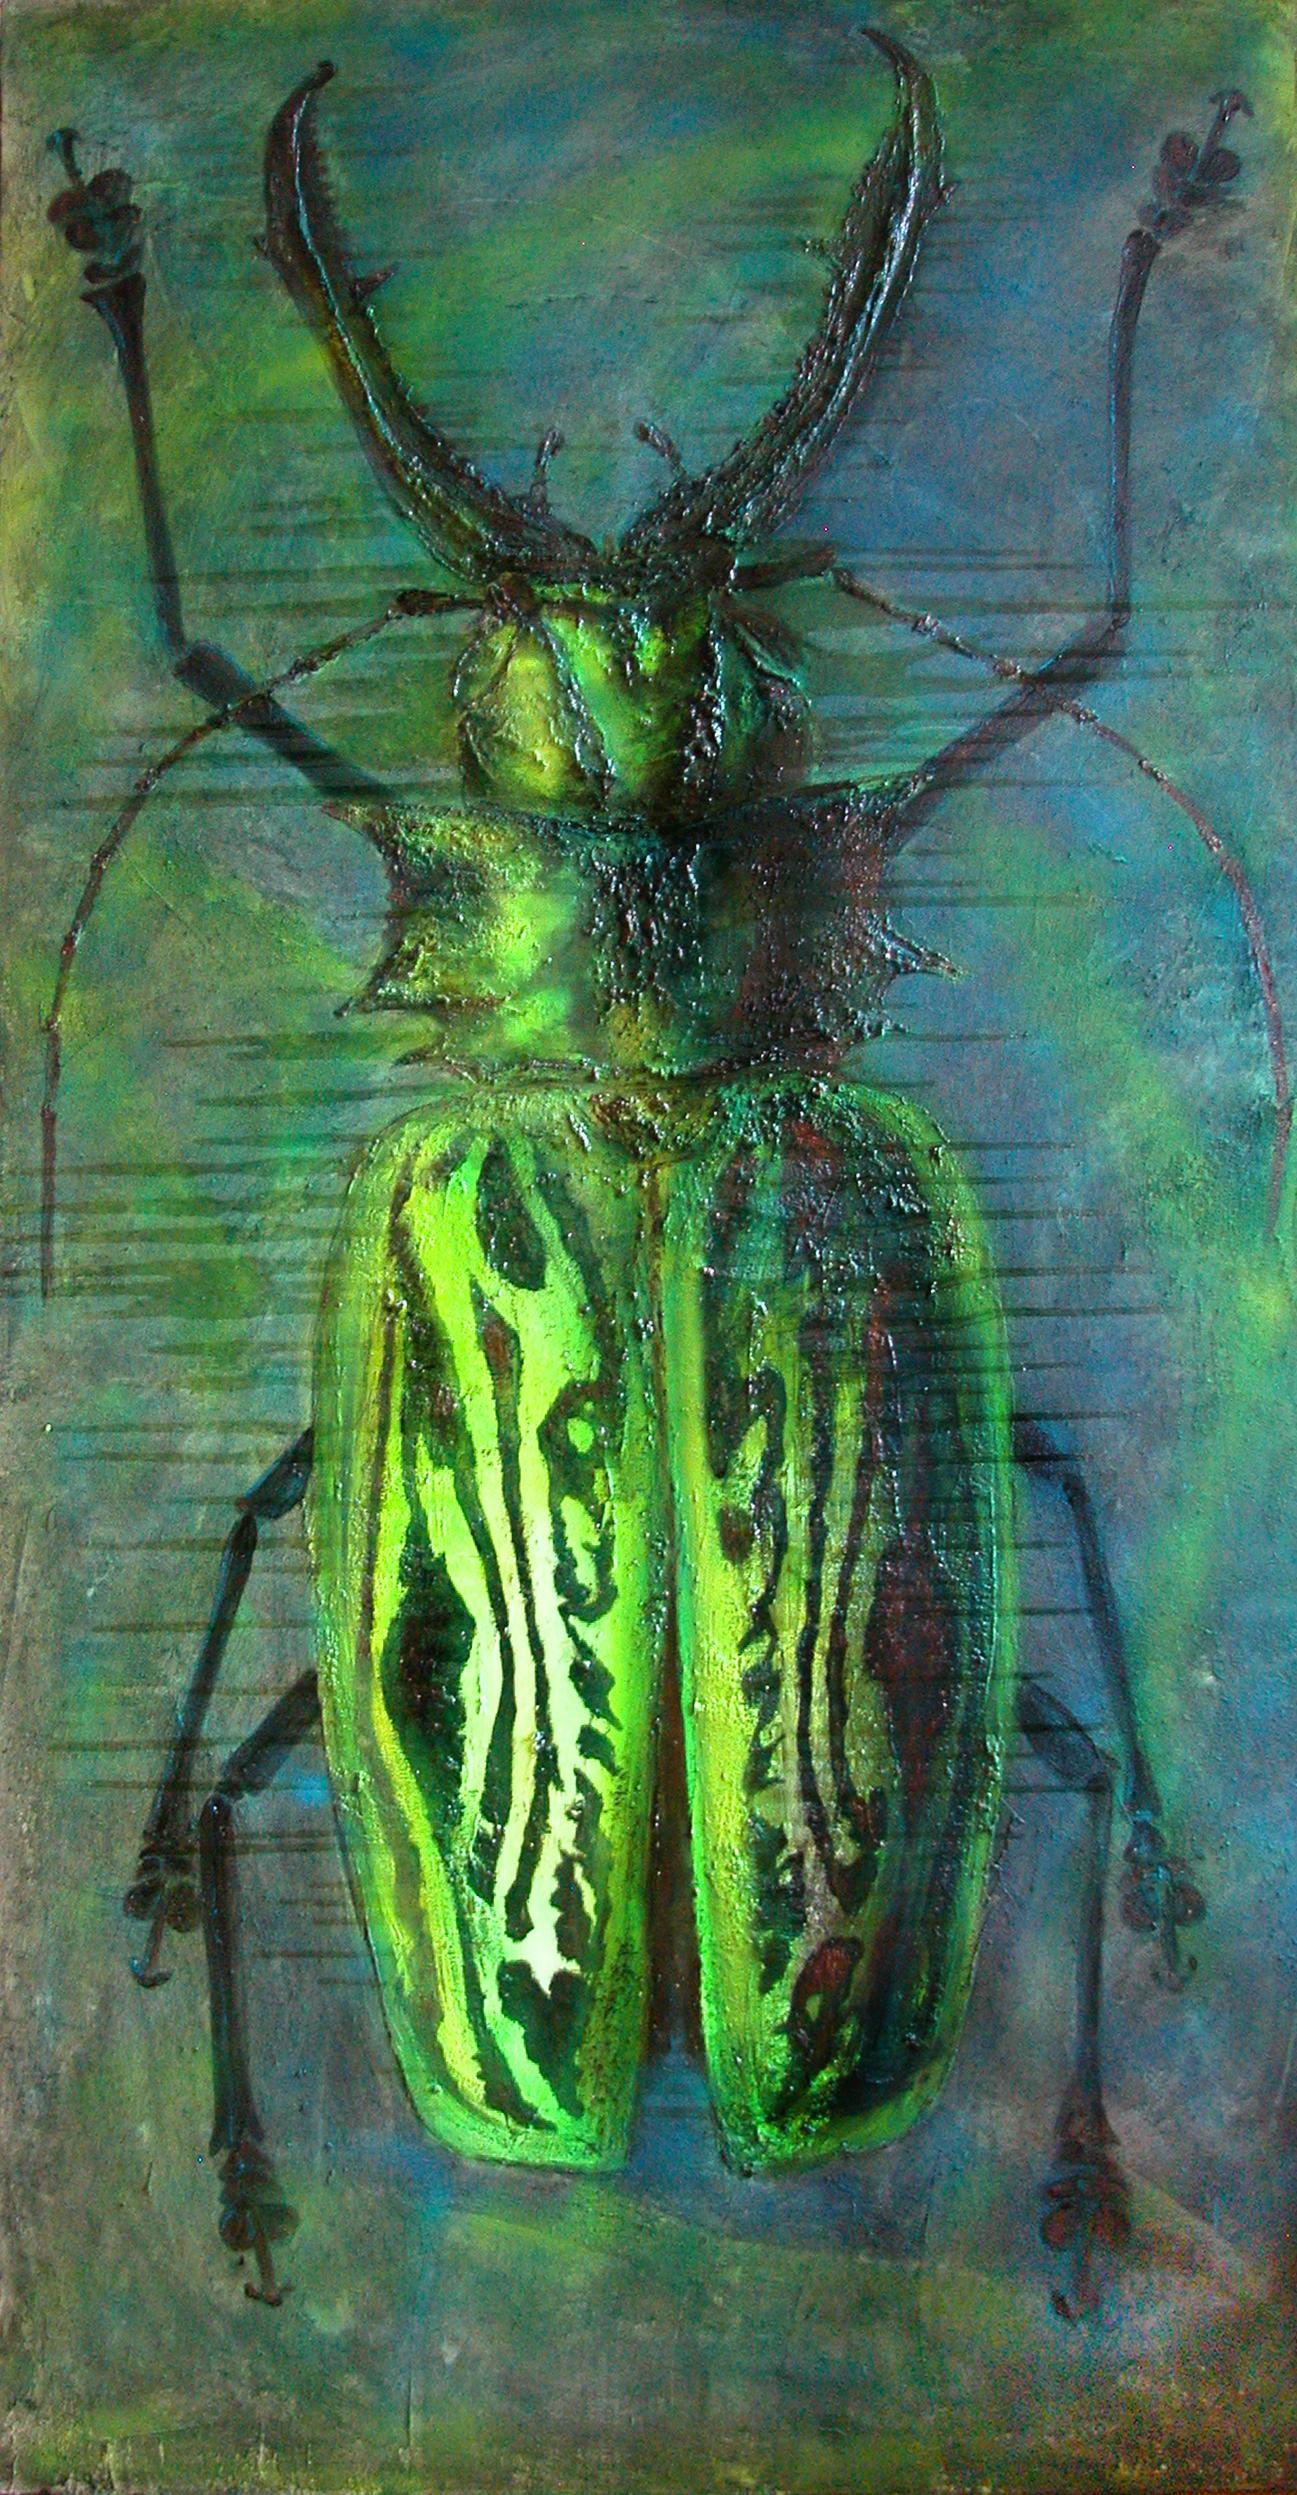 Green Beetle. Large Mixed Media Figurative Painting